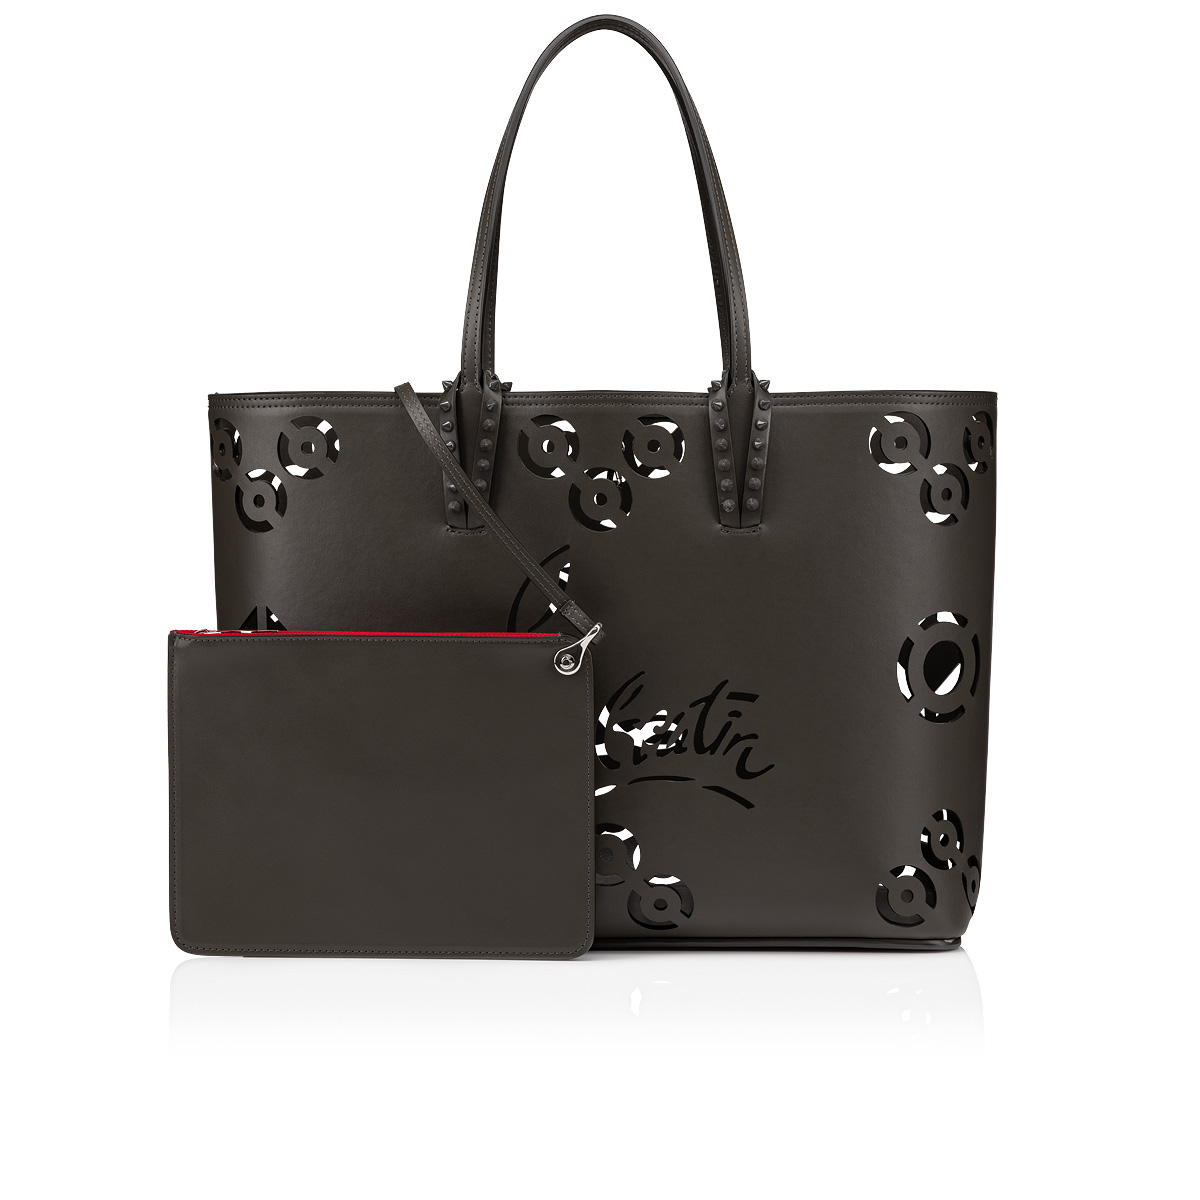 CHRISTIAN LOUBOUTIN: Cabata leather bag with spikes - White